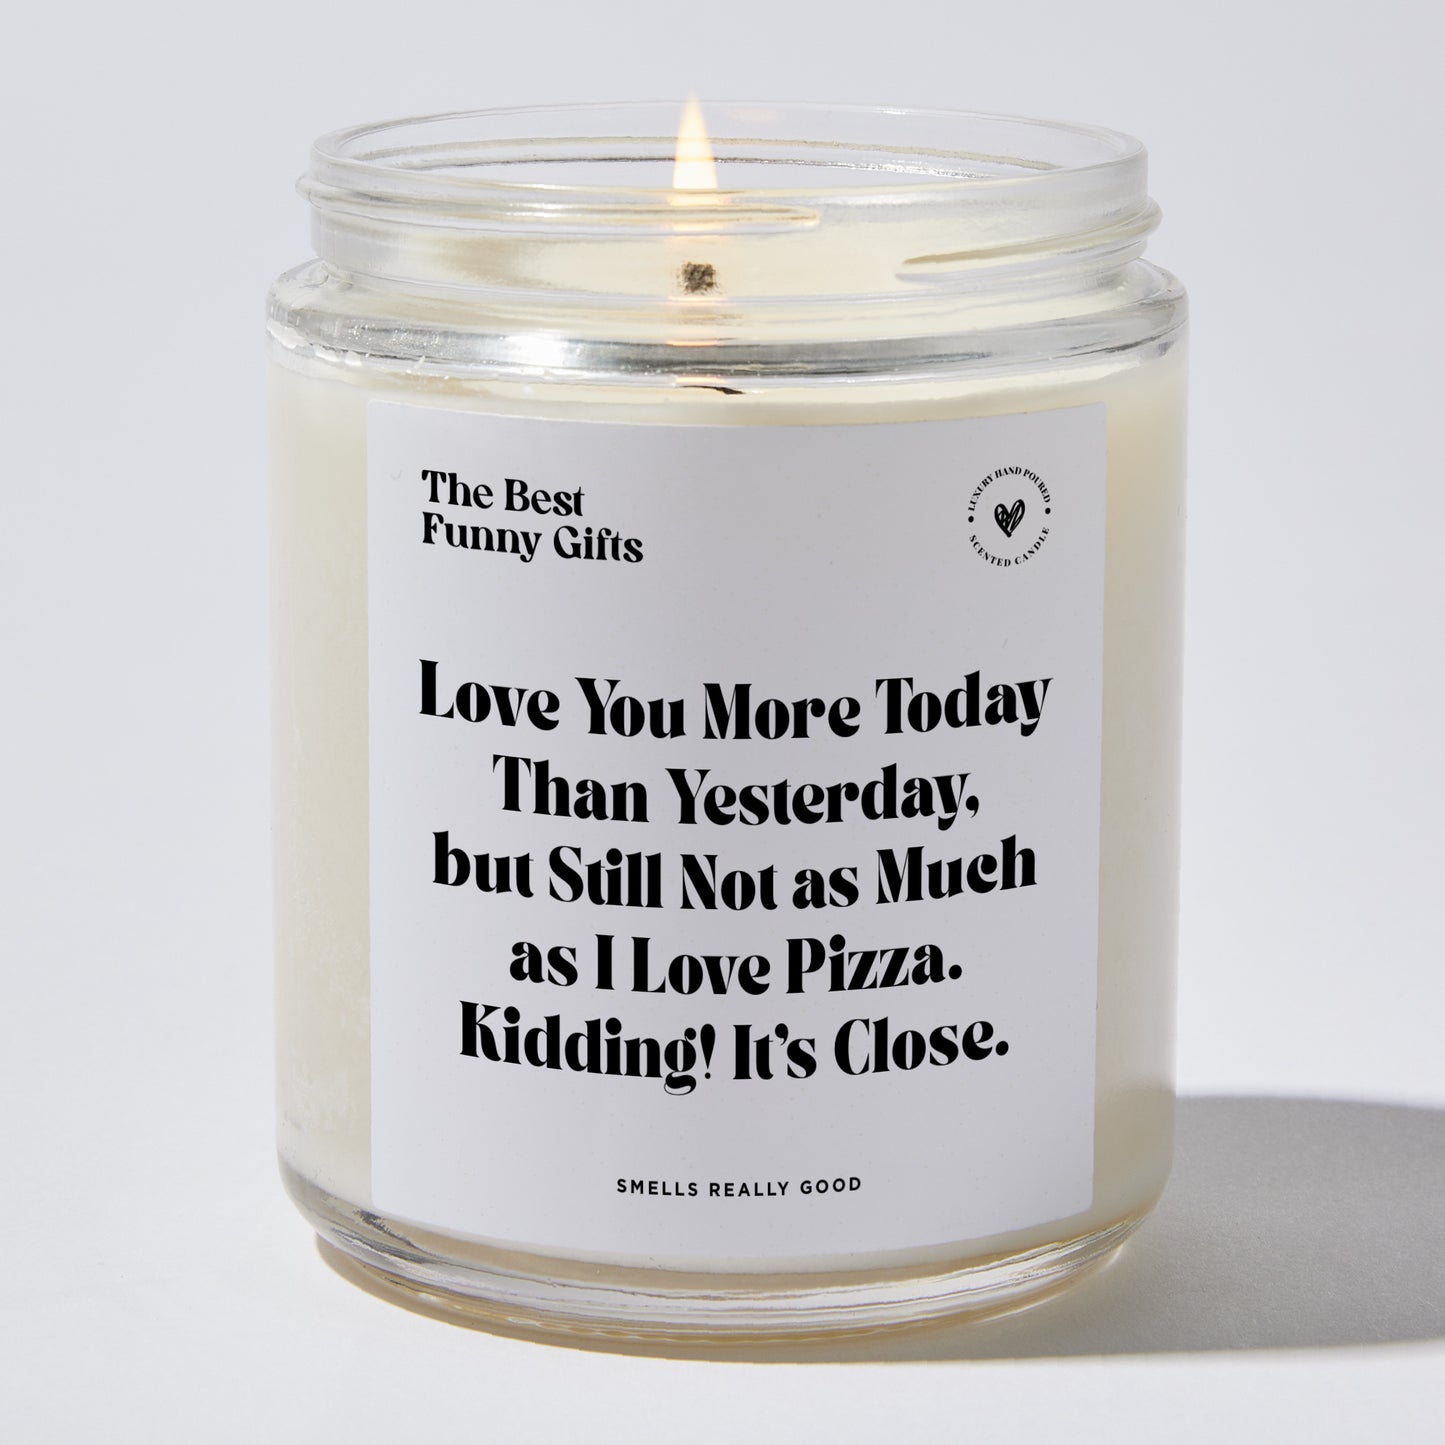 Anniversary Present - Love You More Today Than Yesterday, but Still Not as Much as I Love Pizza. Kidding! It's Close. - Candle